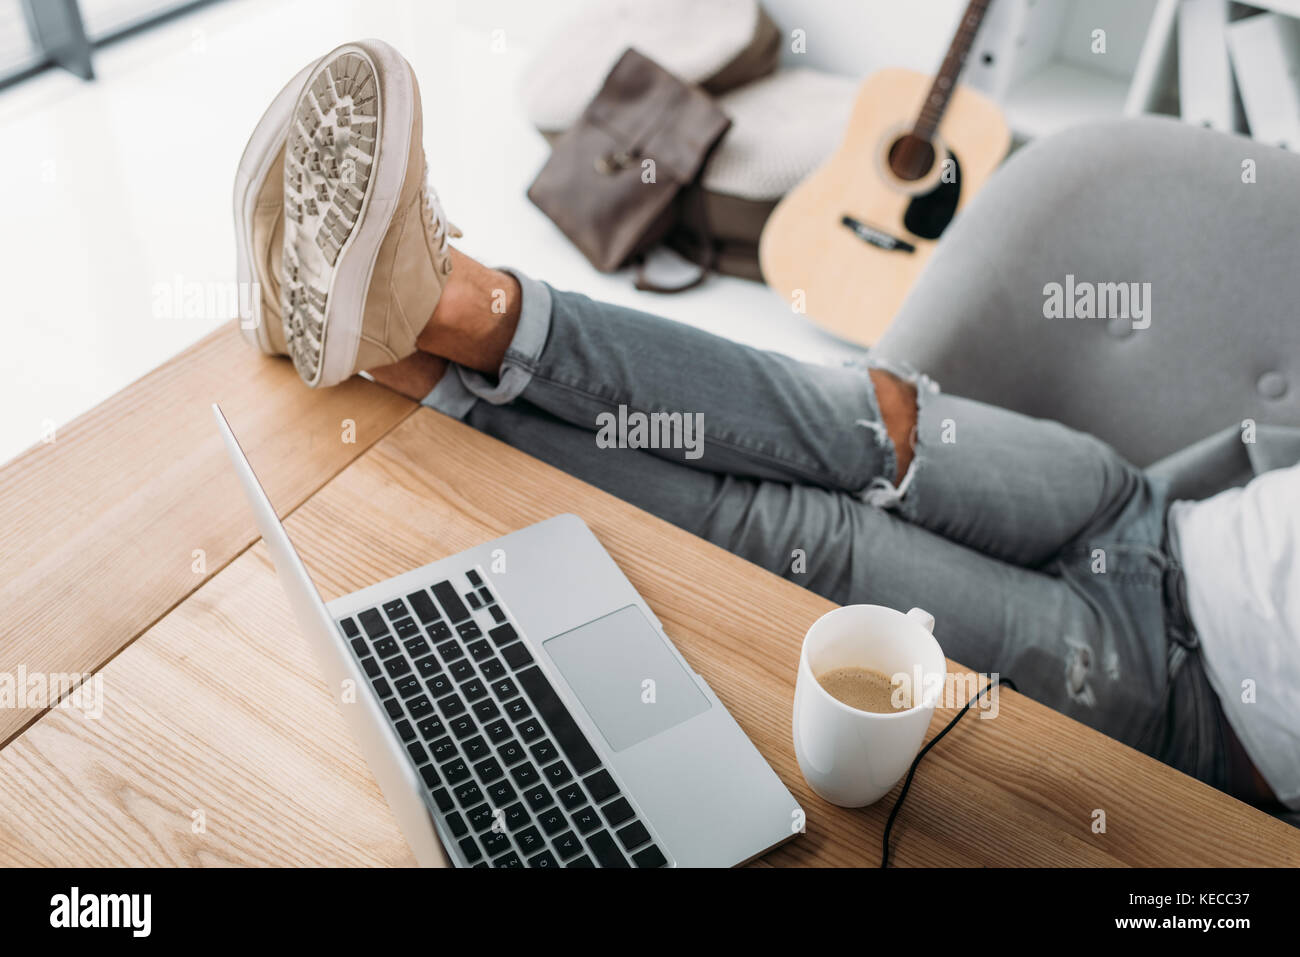 man relaxing at workplace Stock Photo